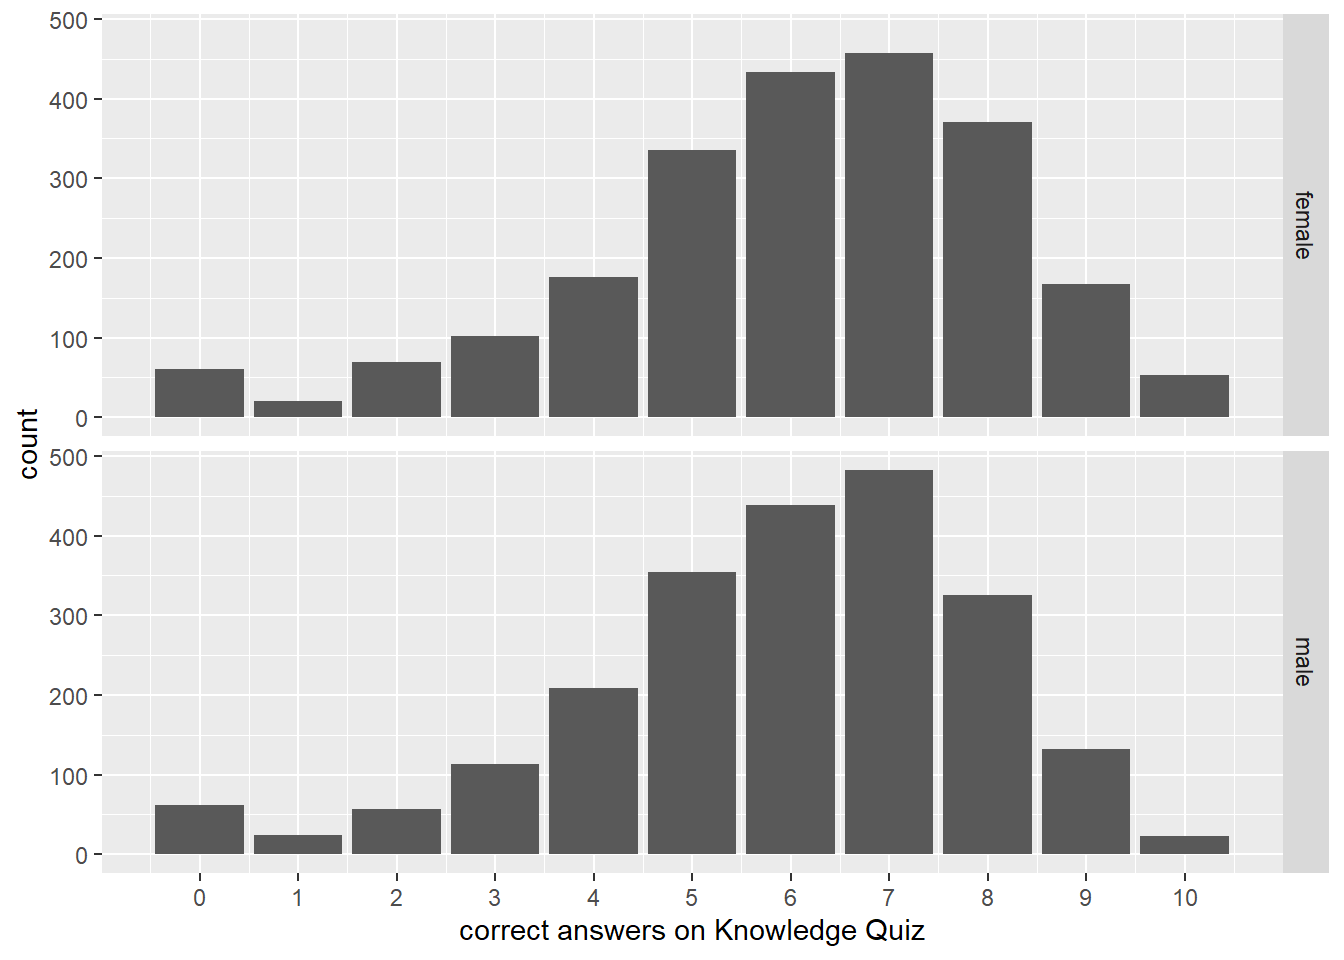 Histogram of count of correct answers on Knowledge Quiz stratified by sex of respondent